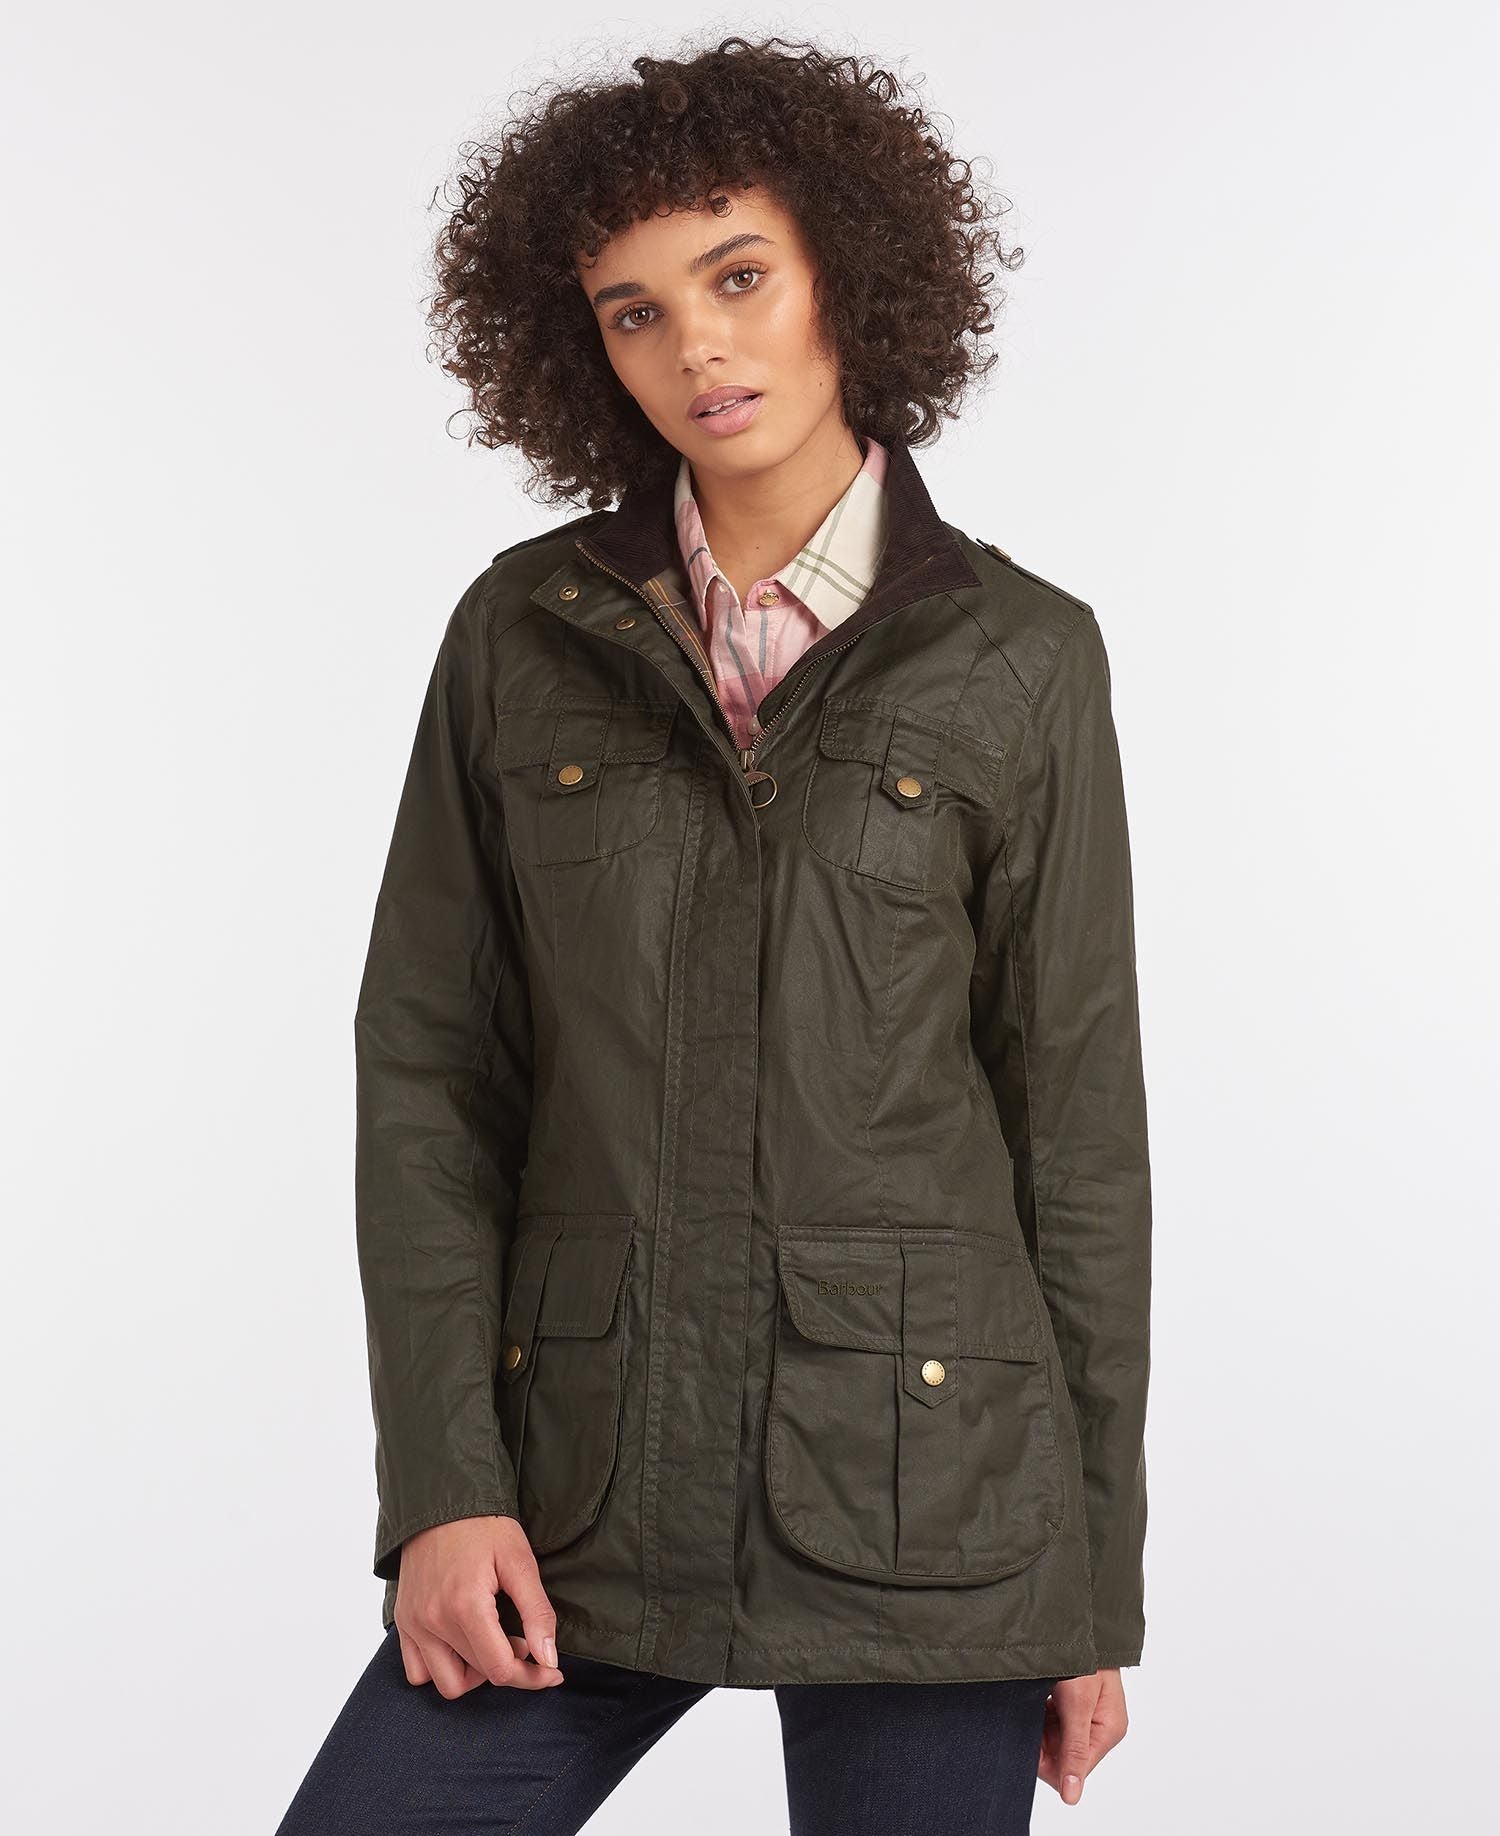 BARBOUR Defence Lightweight Wax Jacket - Ladies - Archive Olive